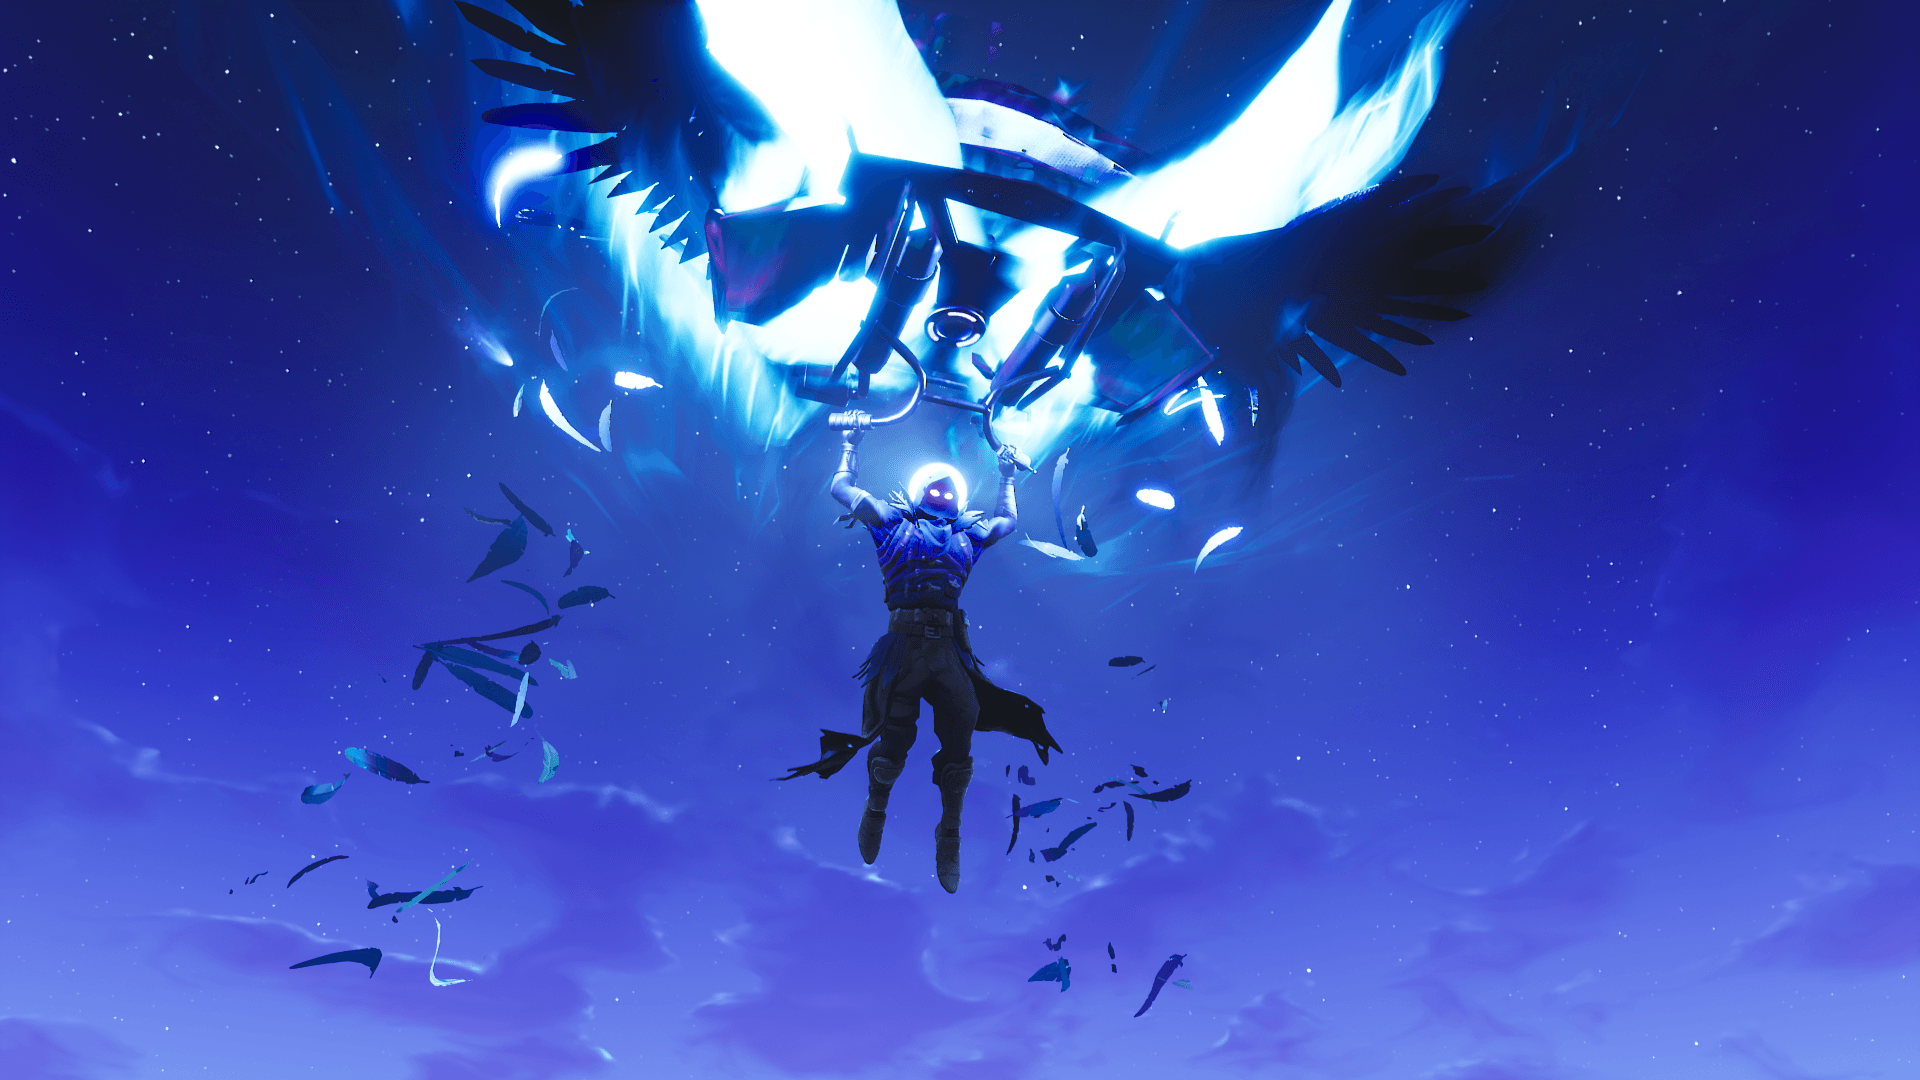 Pin Coolest Fortnite Skins Raven Image to